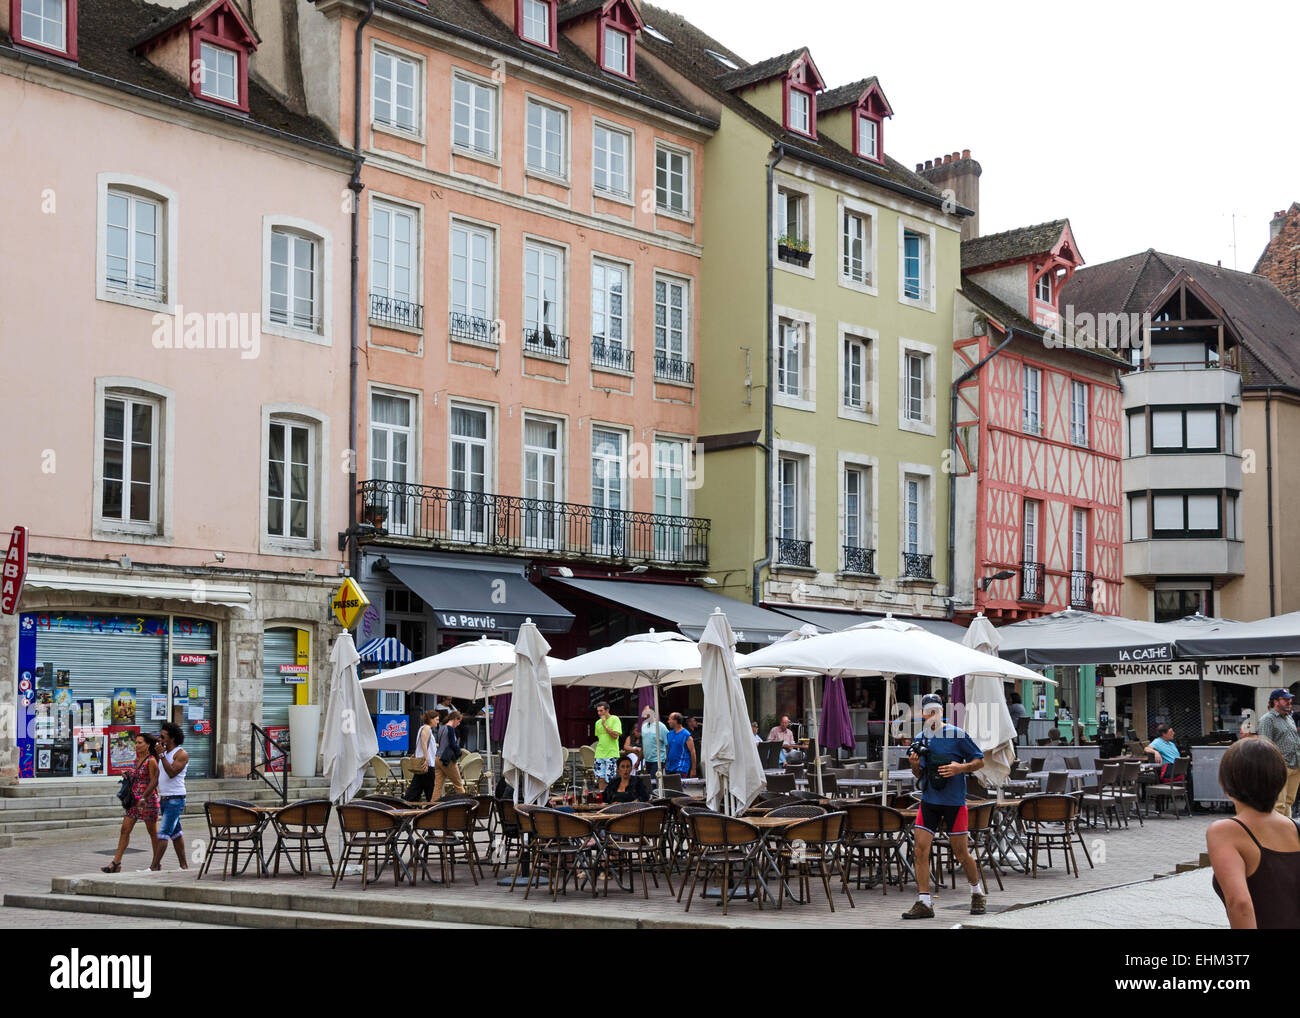 Umbrellas shade outdoor seating in the historic Place Saint-Vincent, Chalon-sur-Saône, Burgundy. Stock Photo